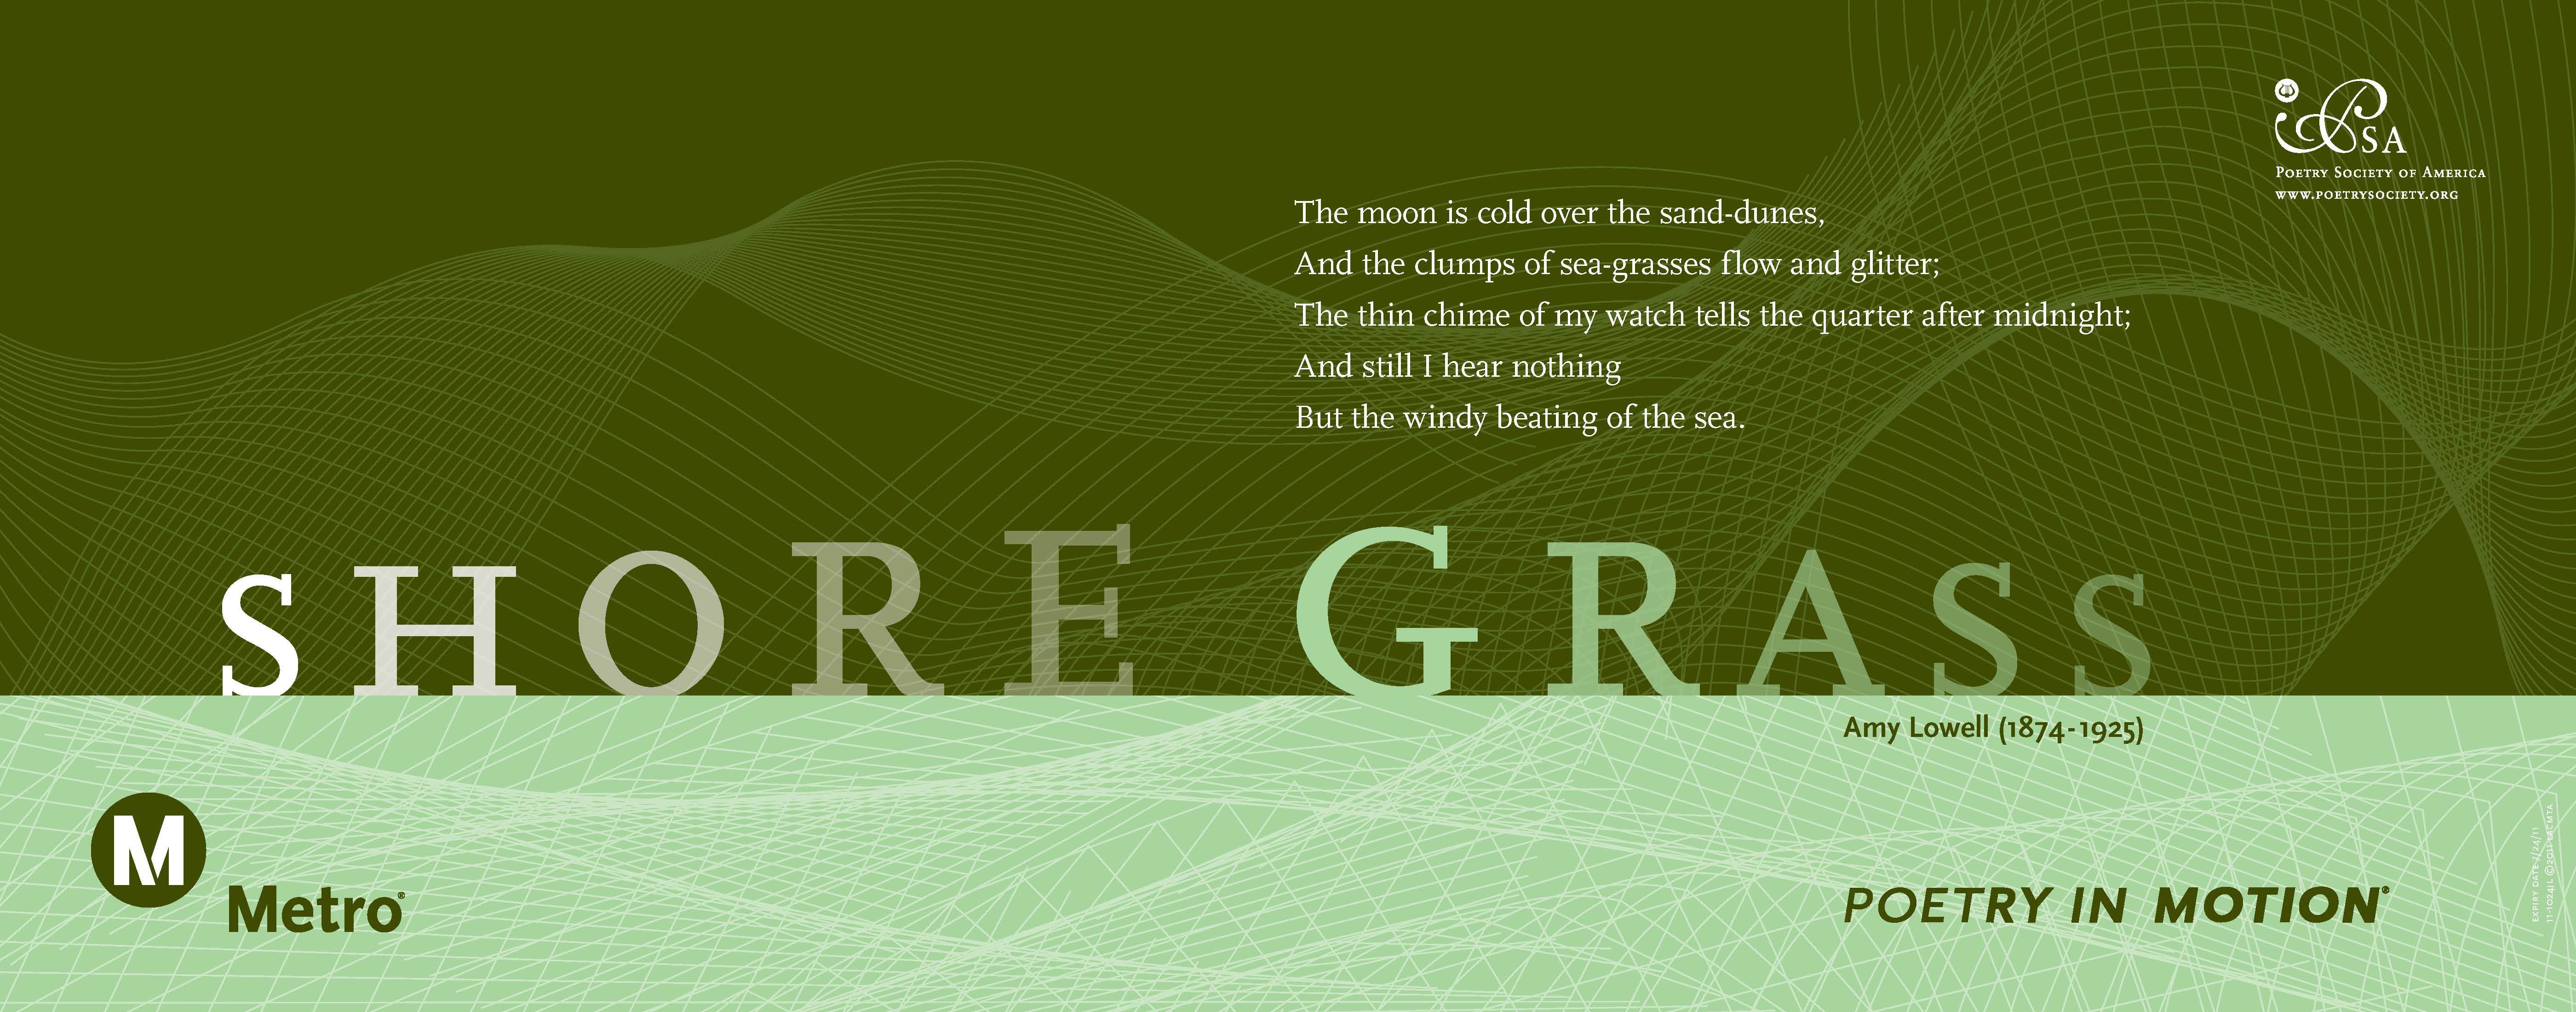 A vertical poster in shades of green features a poem titled Shore Grass, by Amy Lowell.